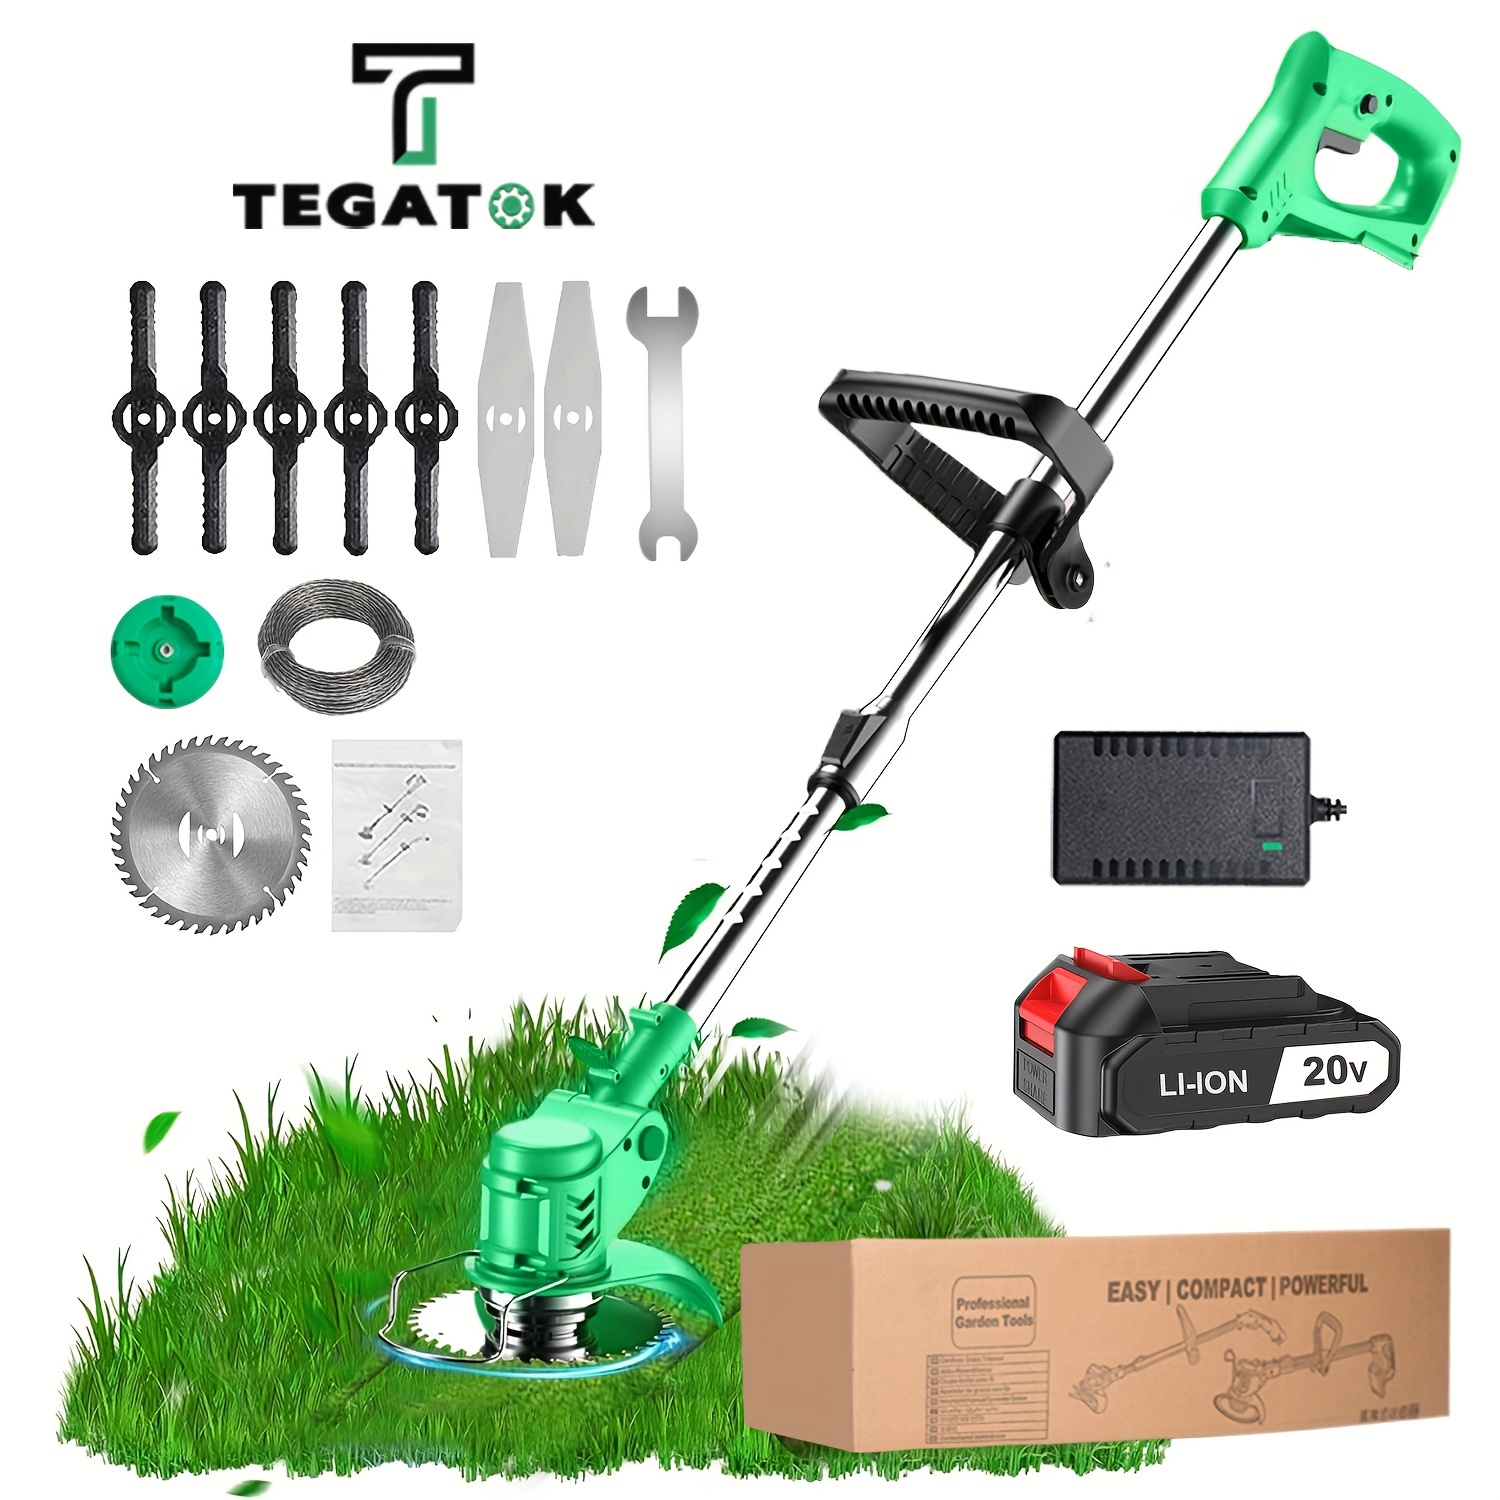 

Tegatok Battery Powered, 4-in-1 Home Cordless Electric , And 2 X 2.0ah Li-ion Batteries, Retractable And Foldable String Trimmer, Edger Lawn Tool For Yard, Lawn, Garden